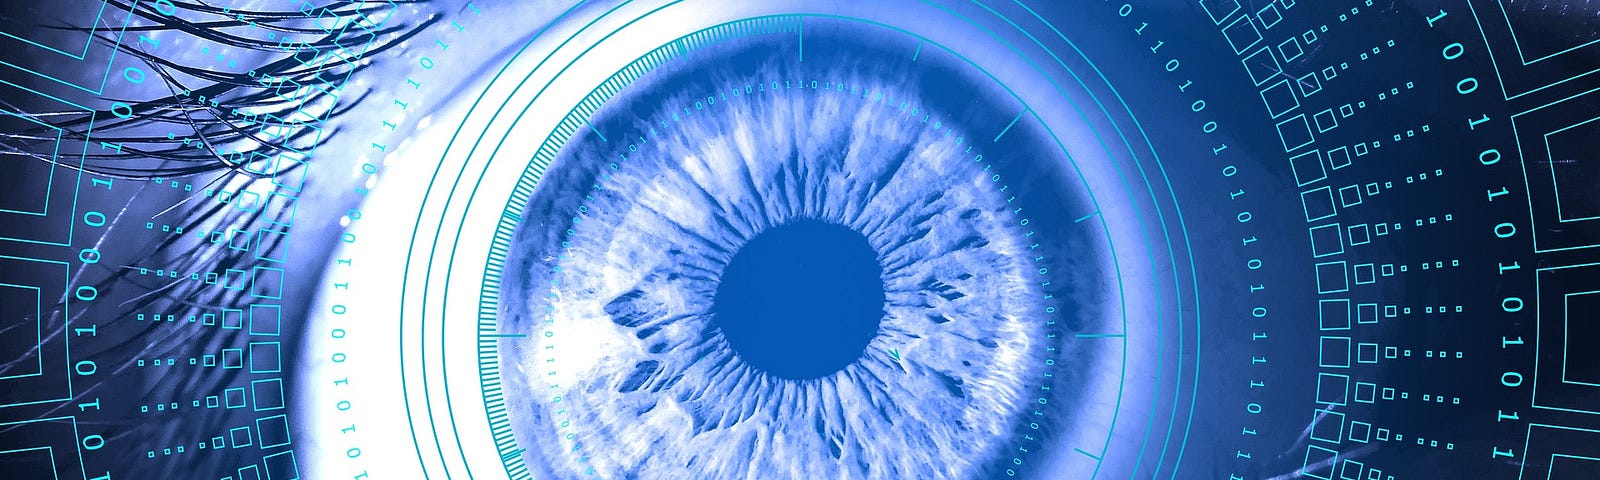 Image of an eye with lens settings around it.